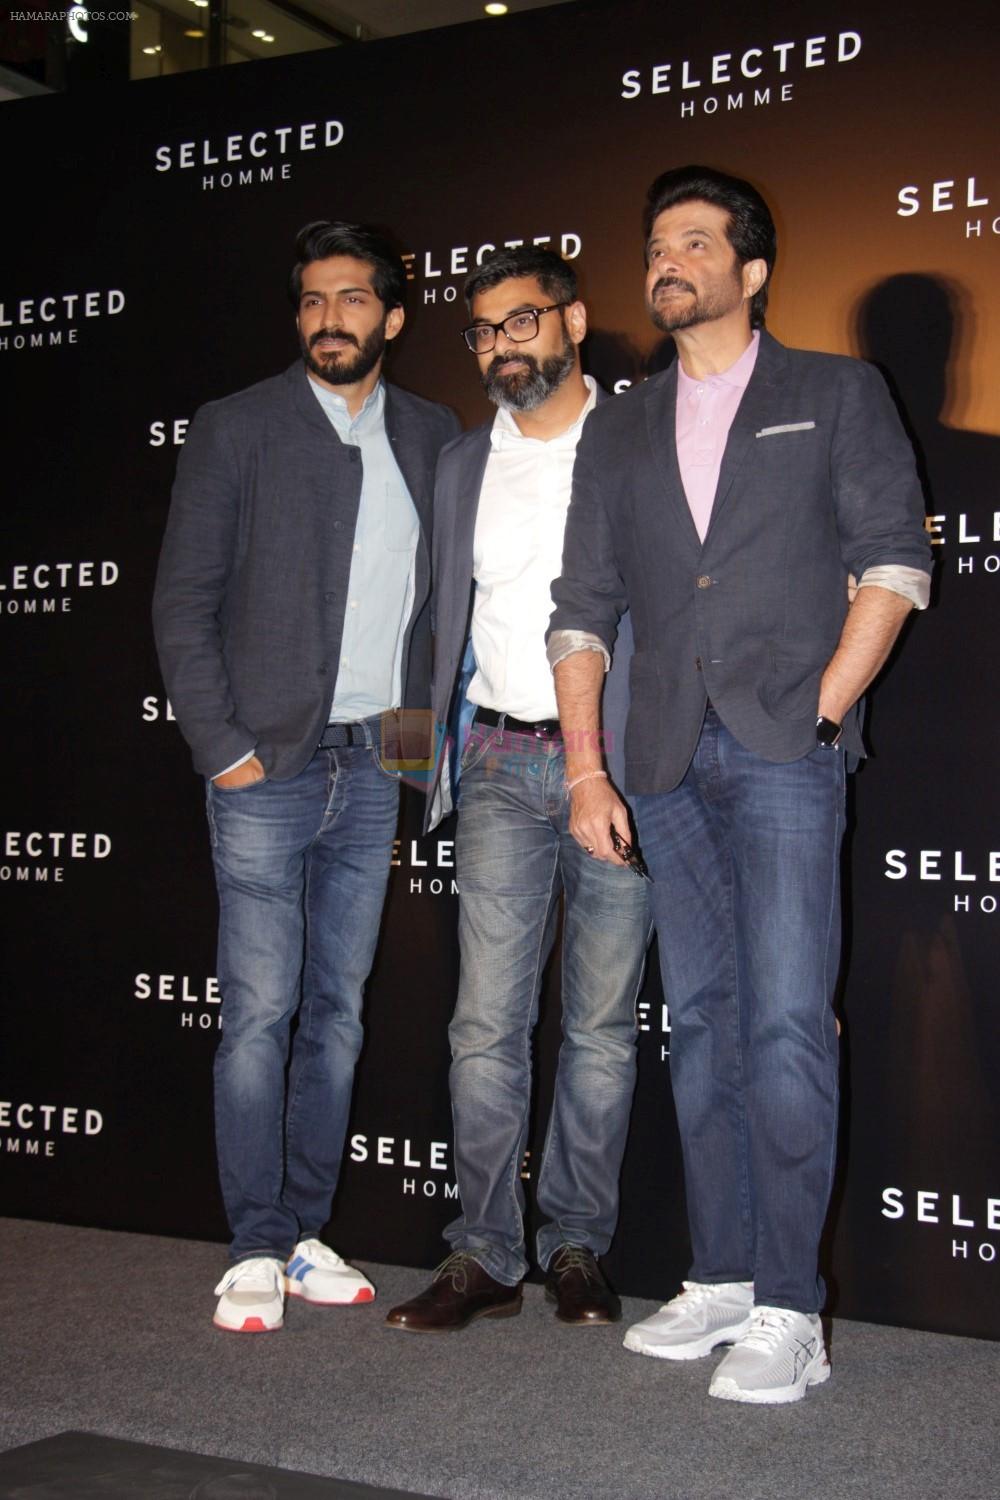 Anil Kapoor & Harshvardhan Kapoor are Launching Premium Menswear Collection on 5th May 2017